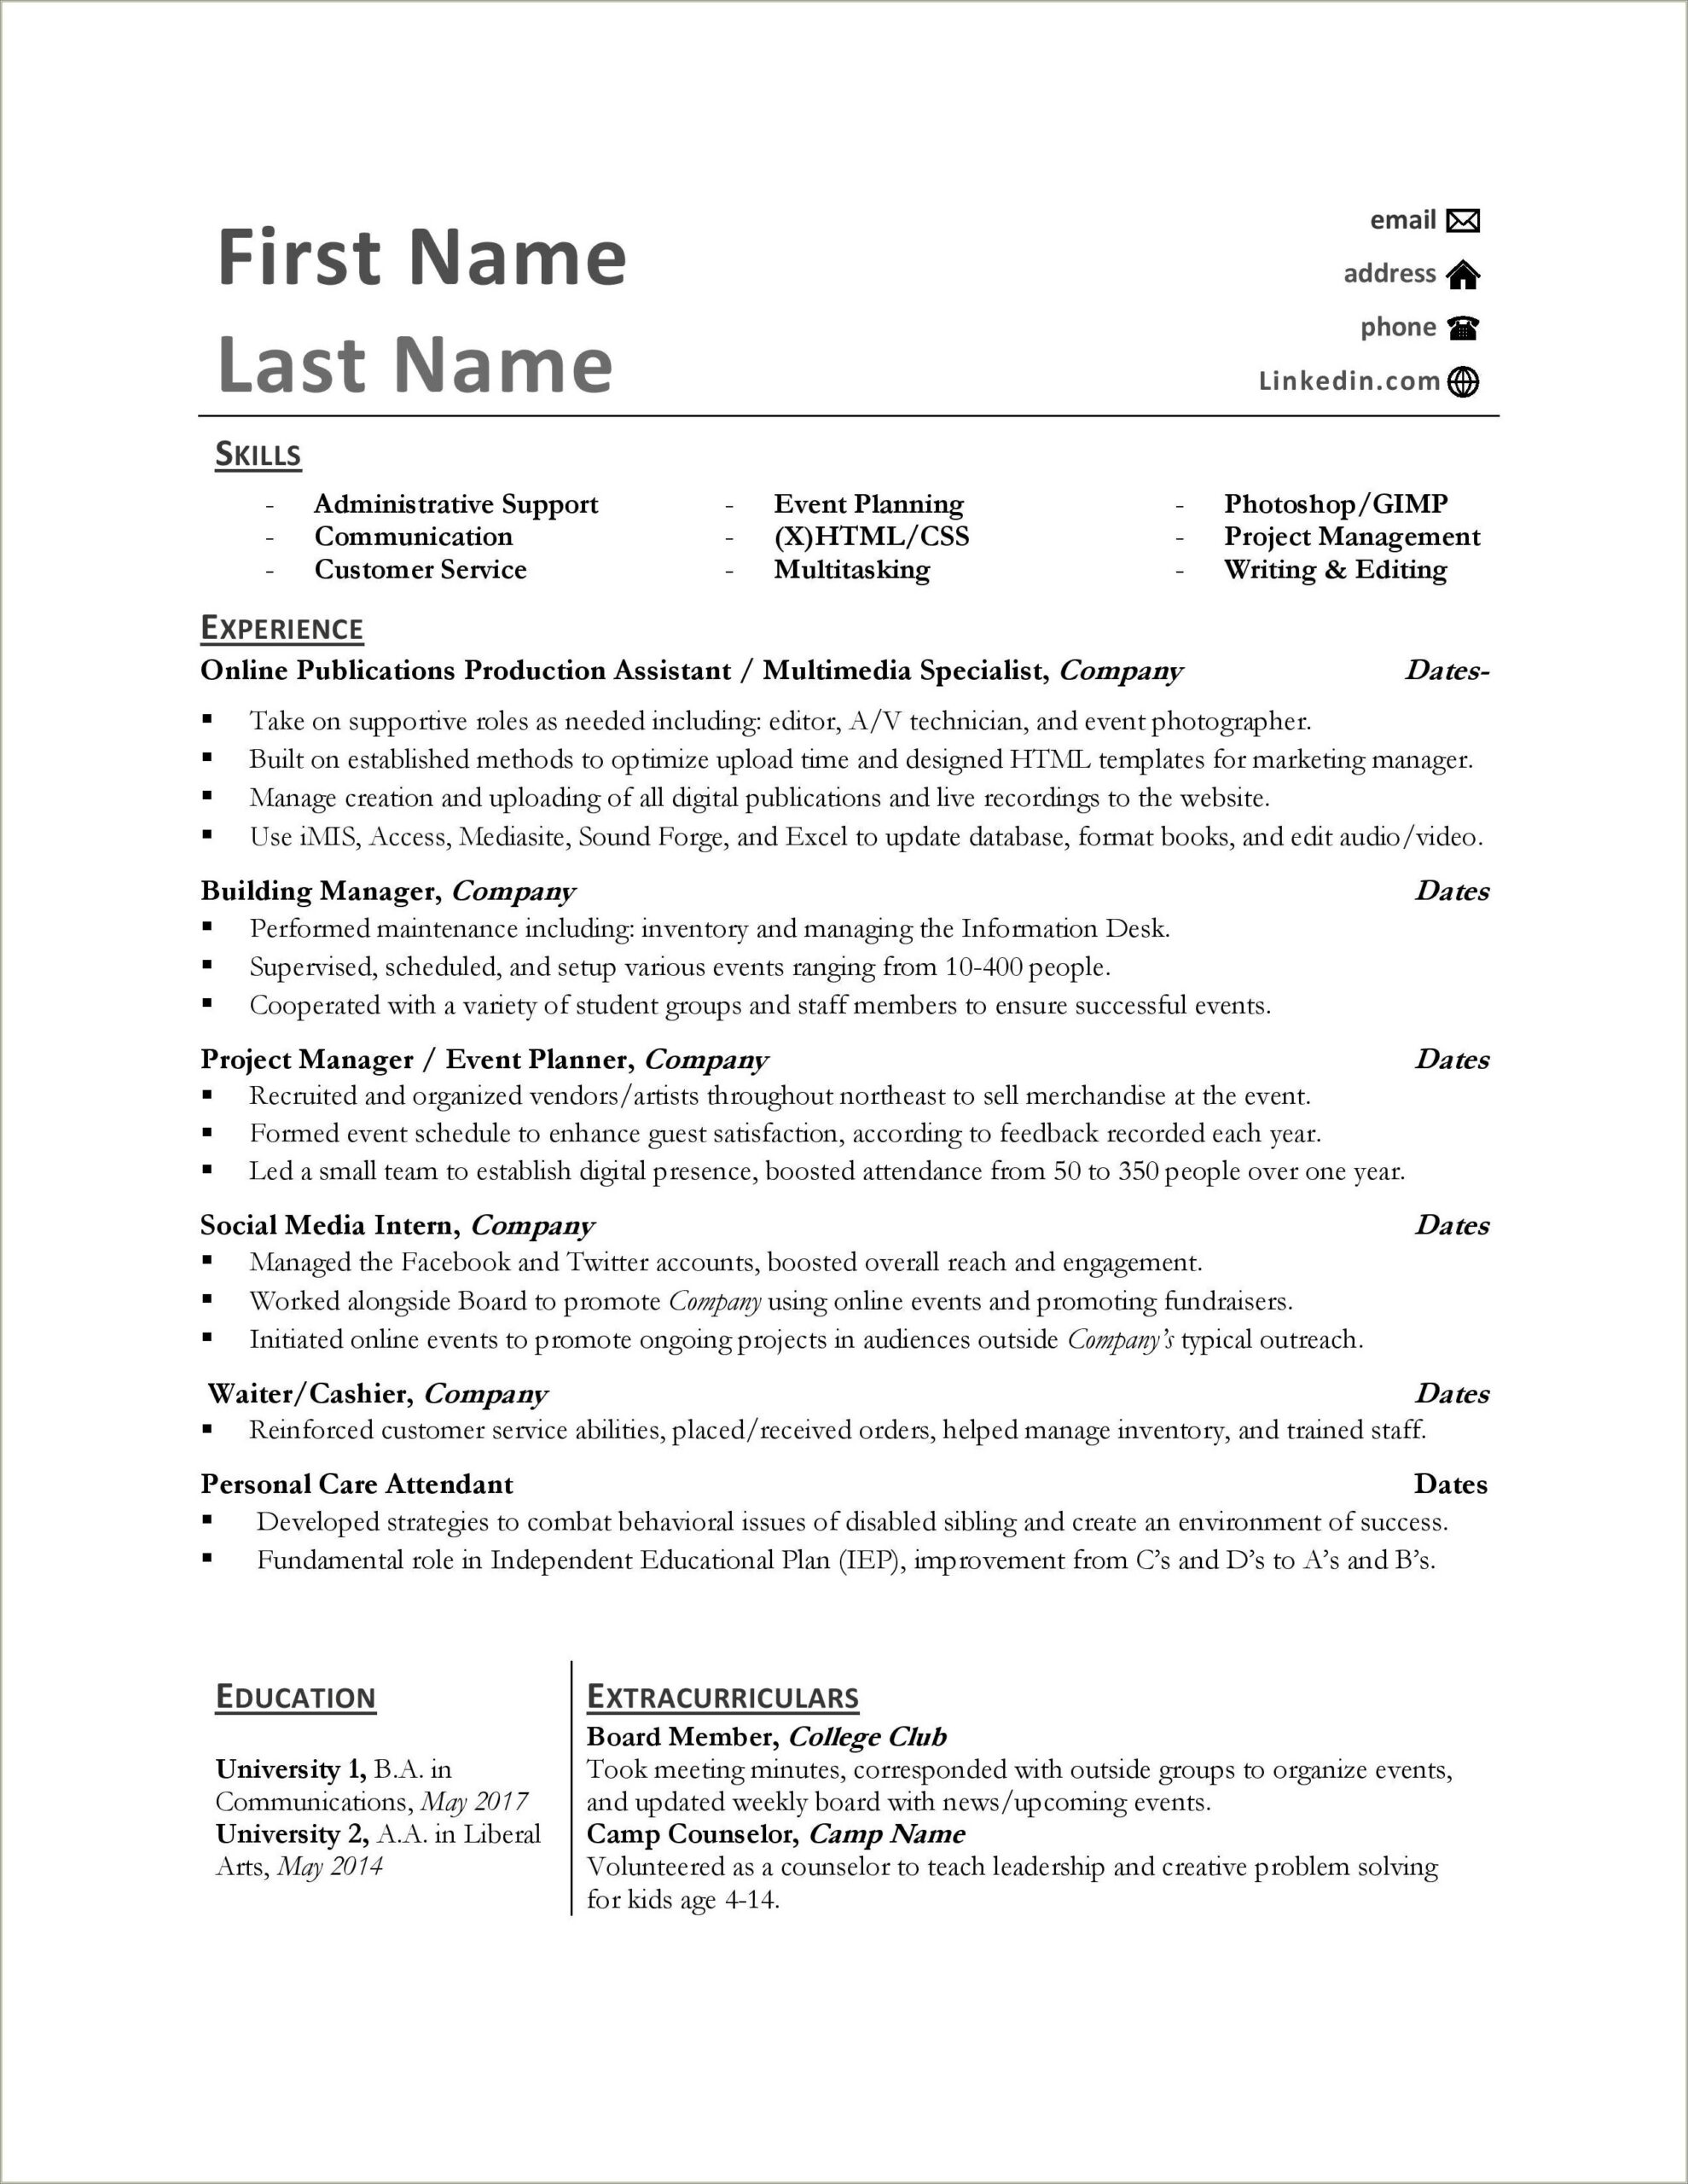 Resume Two Jobs With Same Description